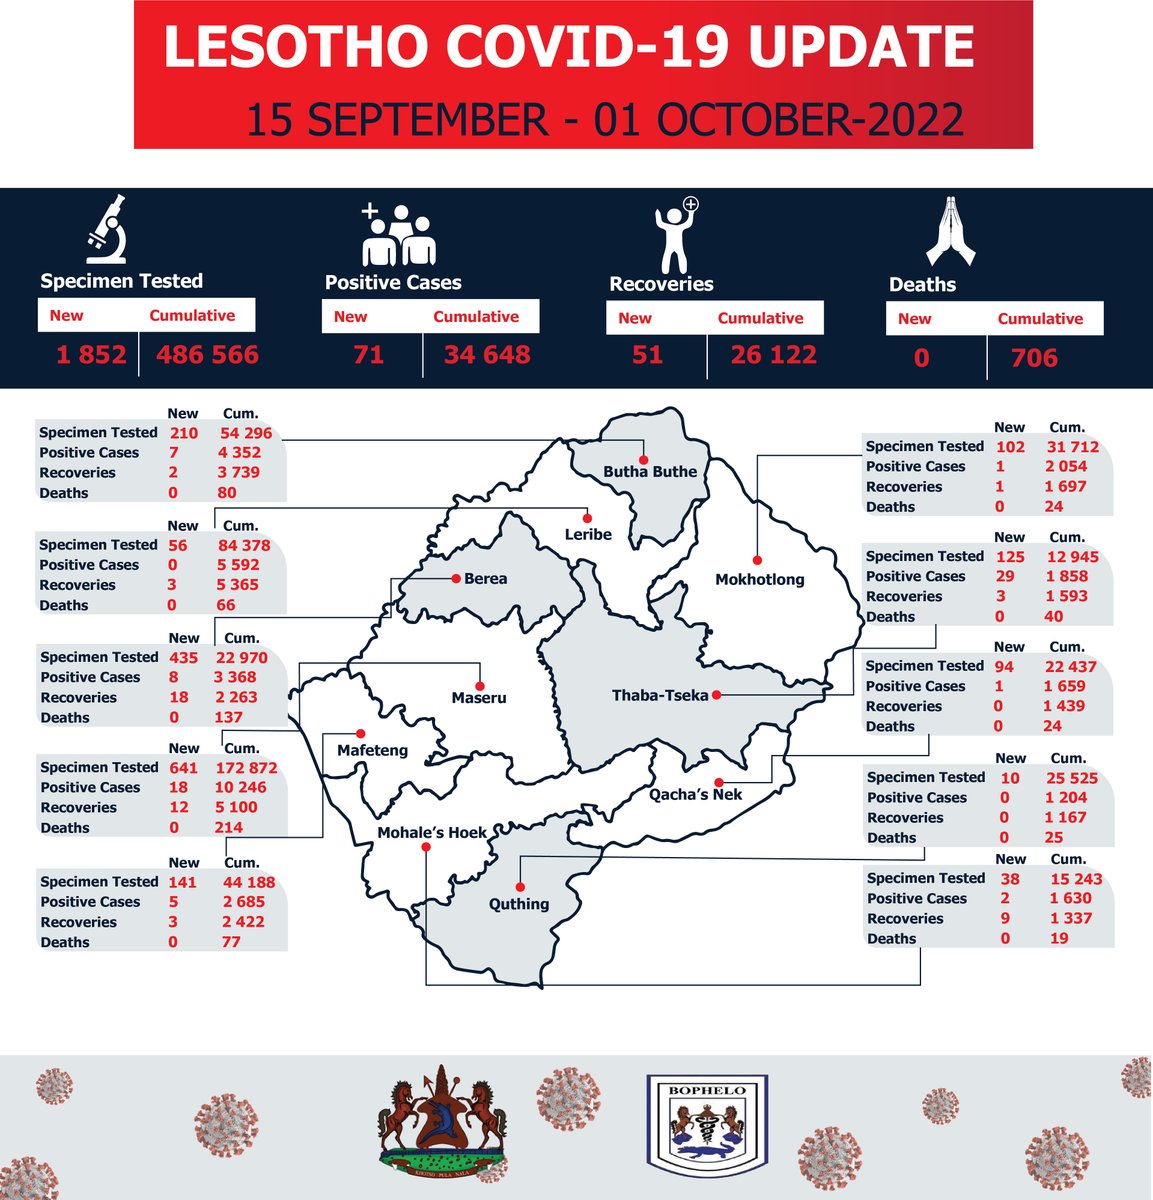 Lesotho COVID-19 Statistics as at 25th September - 1st October 2022.
#MaskUp
#StaySafe 
#COVIDLesotho
#VforVaccinate